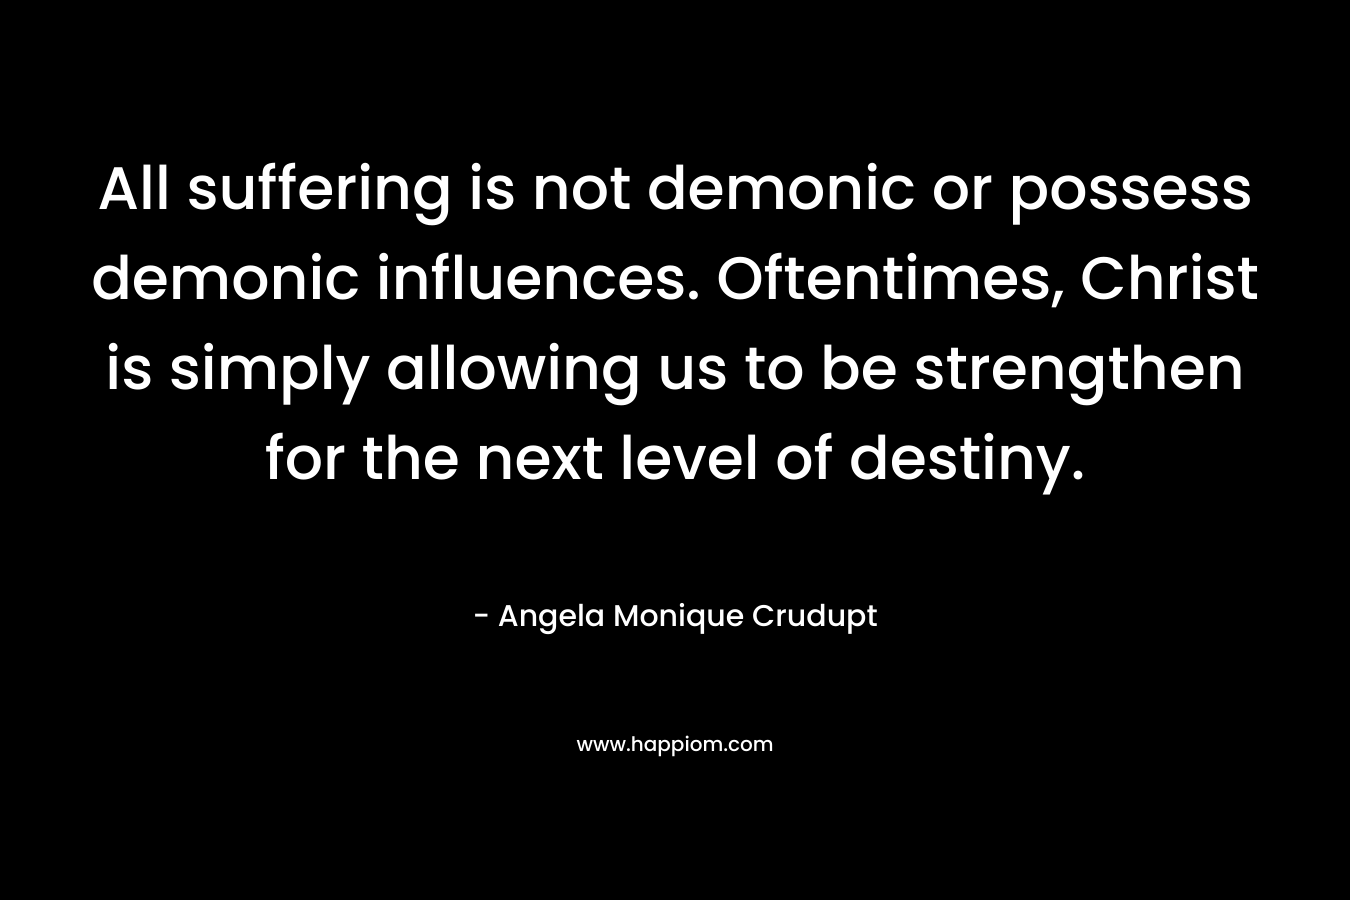 All suffering is not demonic or possess demonic influences. Oftentimes, Christ is simply allowing us to be strengthen for the next level of destiny.